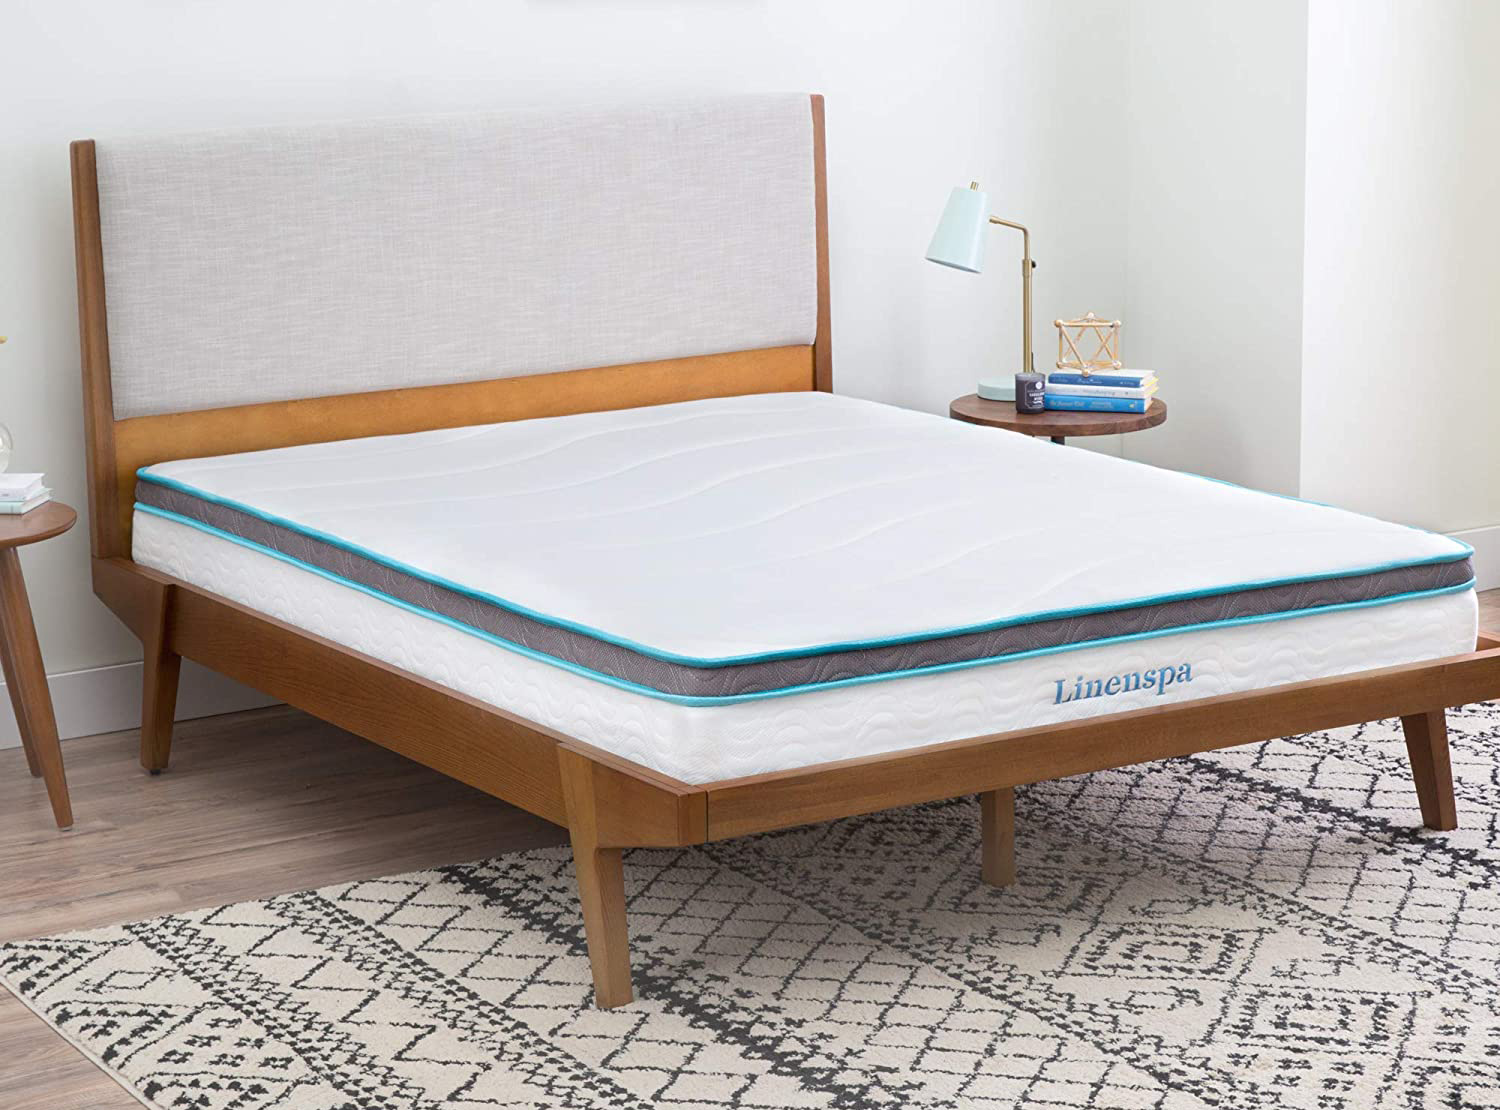 How is this memory foam mattress with 77,000 5star